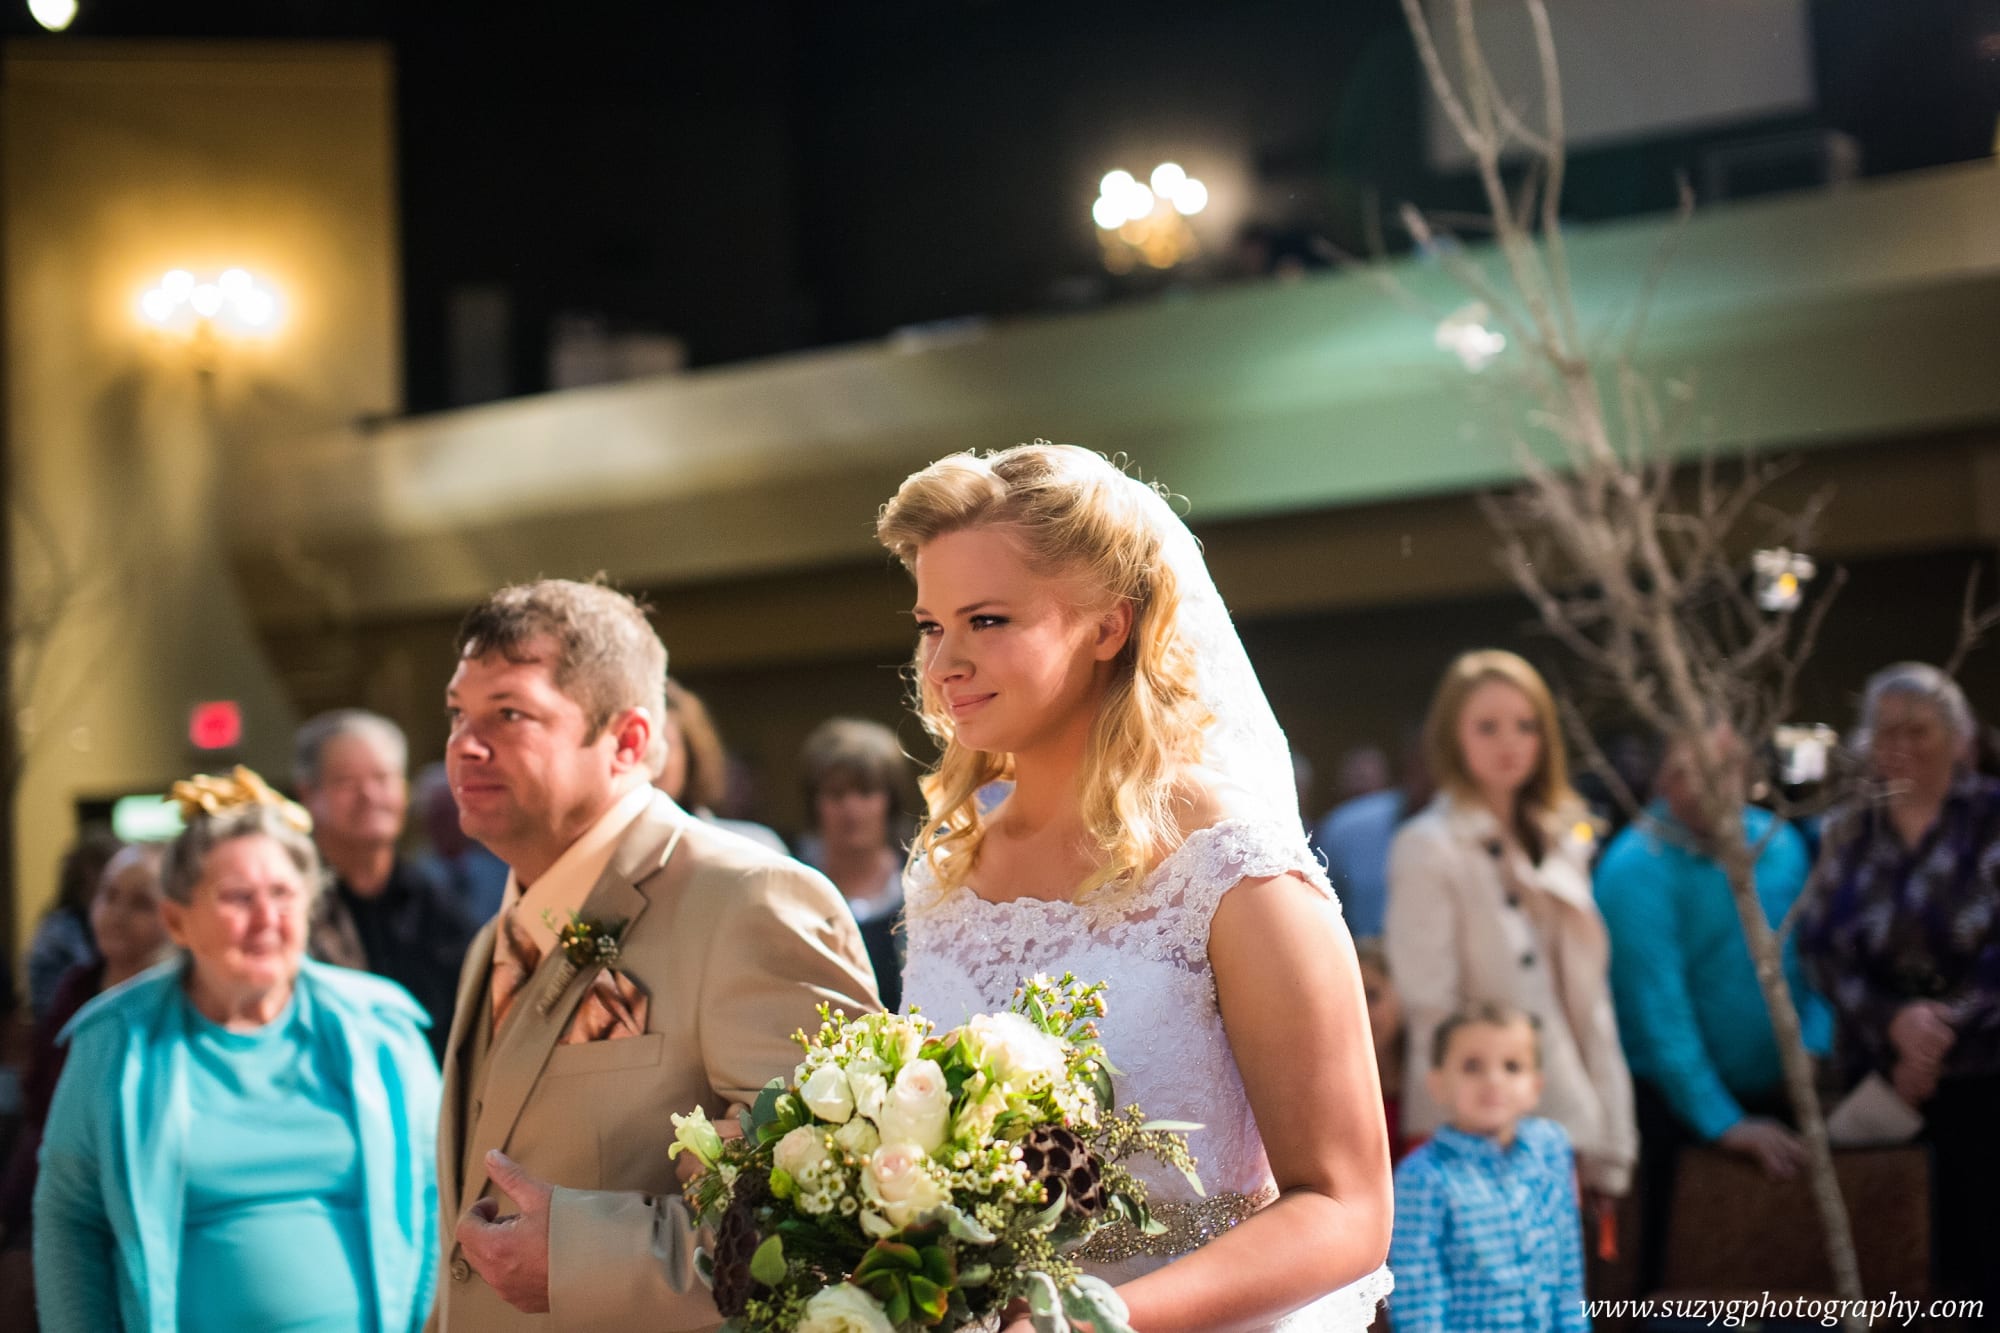 vows by victoria-lake charles-wedding-photography-suzy g-photography-suzygphotography_0040